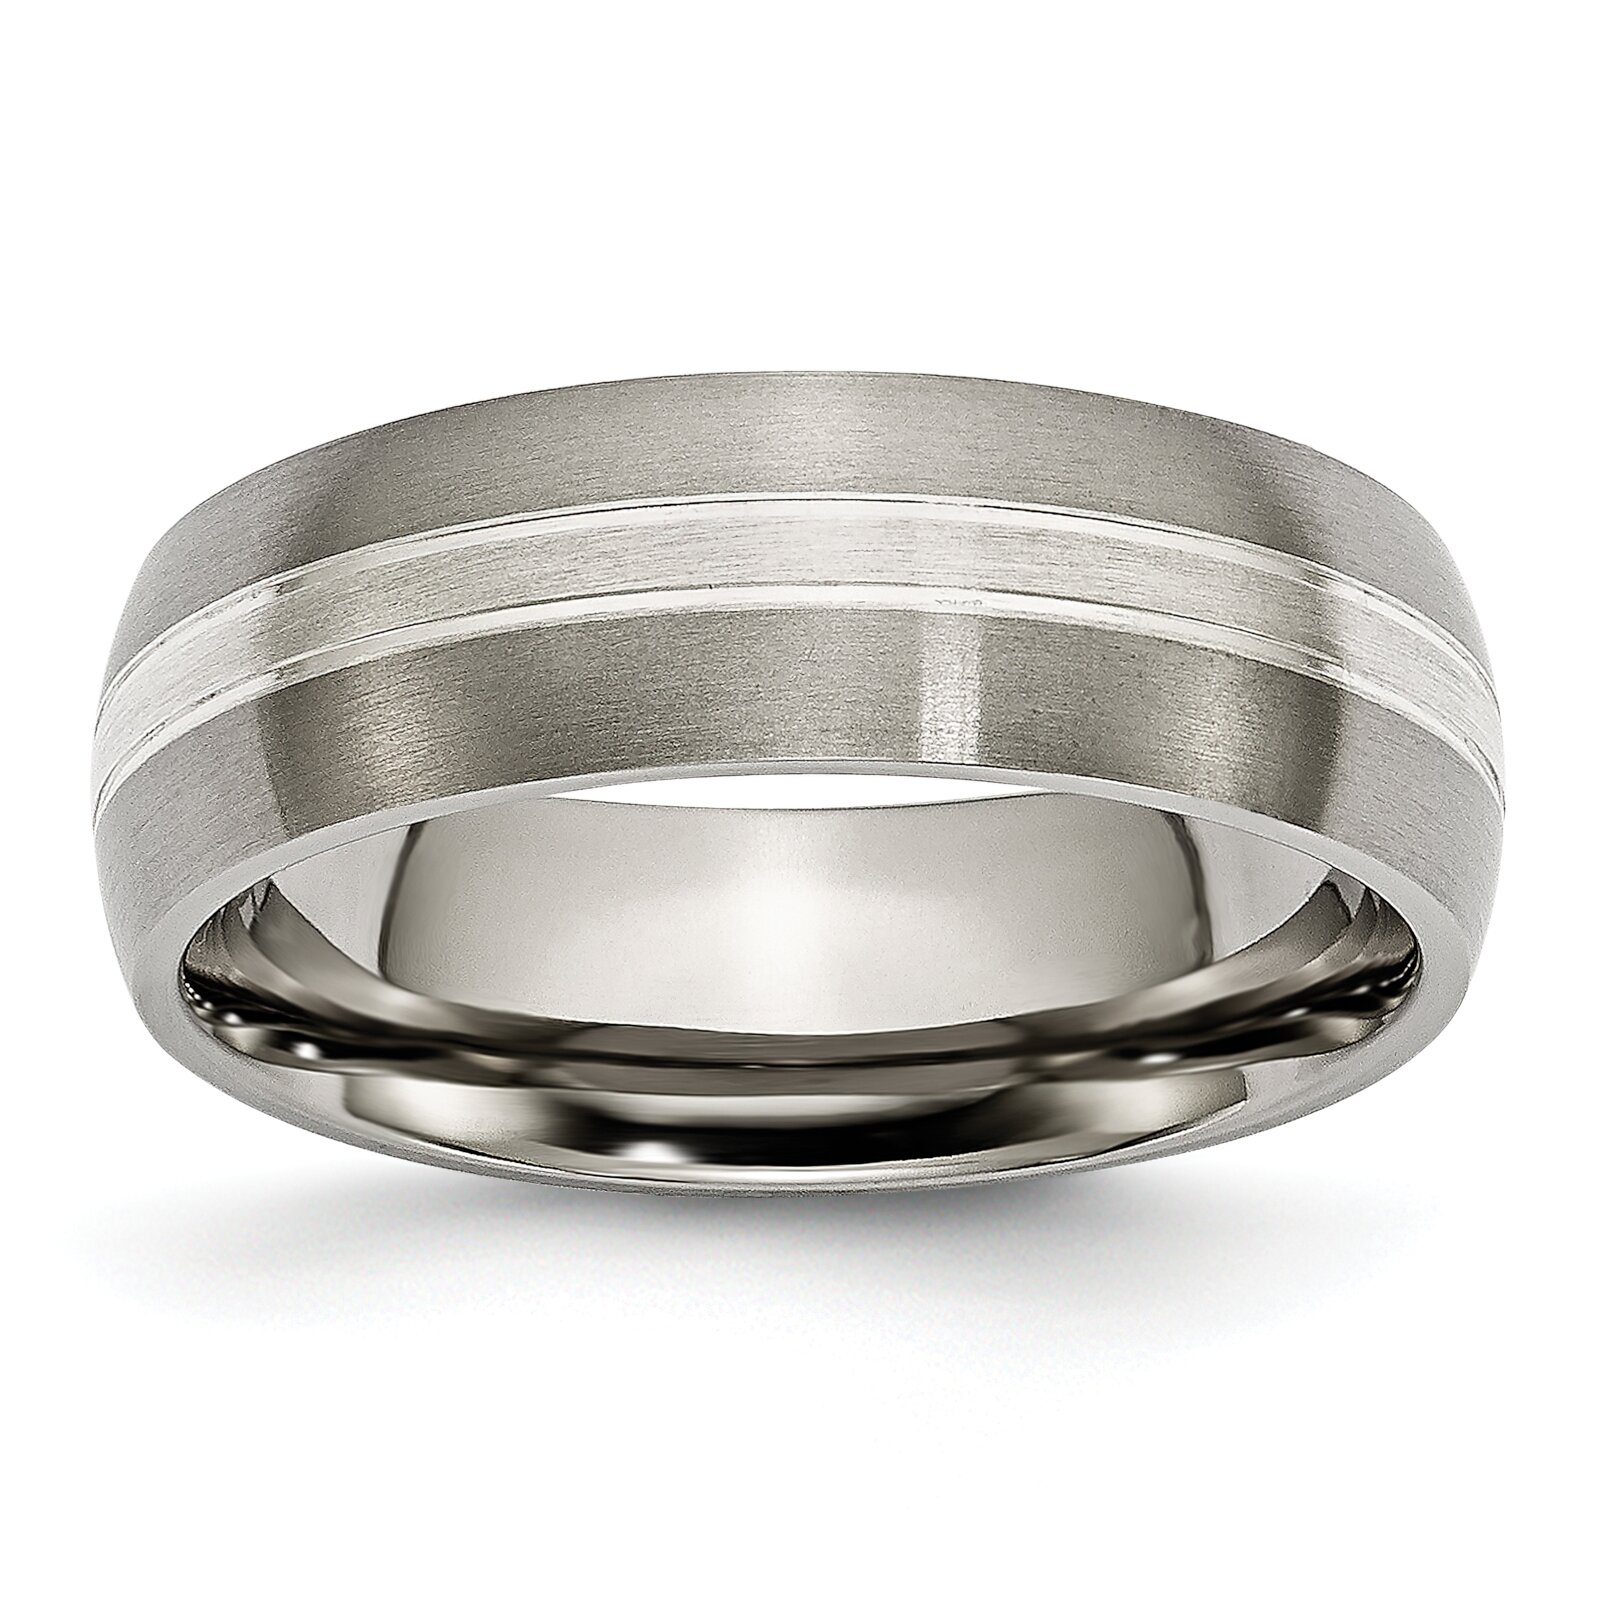 Findingking Titanium Grooved 7mm Satin Mens Wedding Ring Size 8